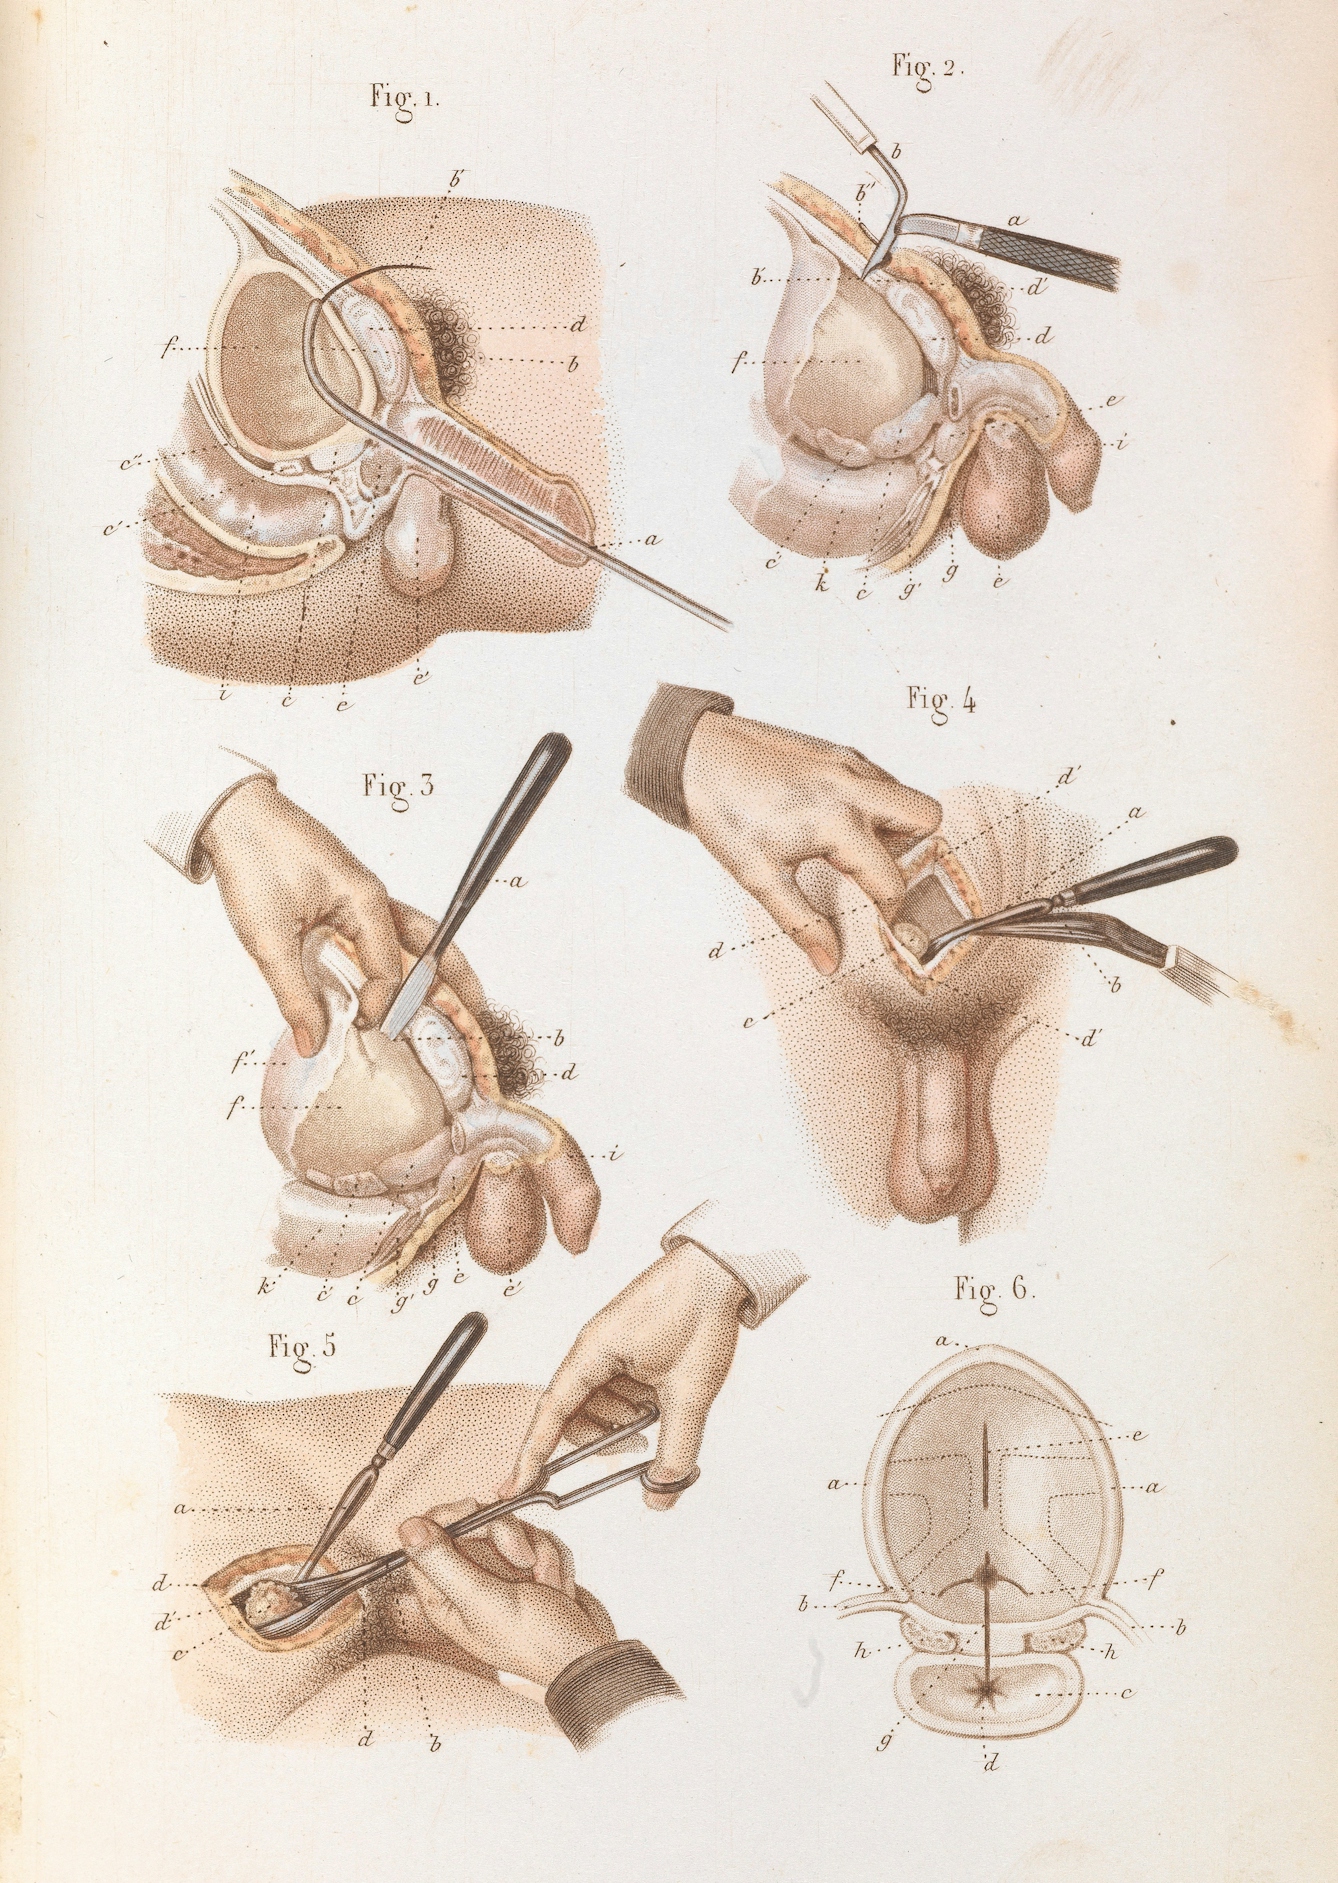 Surgical removal of a stone from the bladder from 'Précis iconographique de médecine opératoire et d'anatomie chirurgicale' by Claude Bernard, 1848 